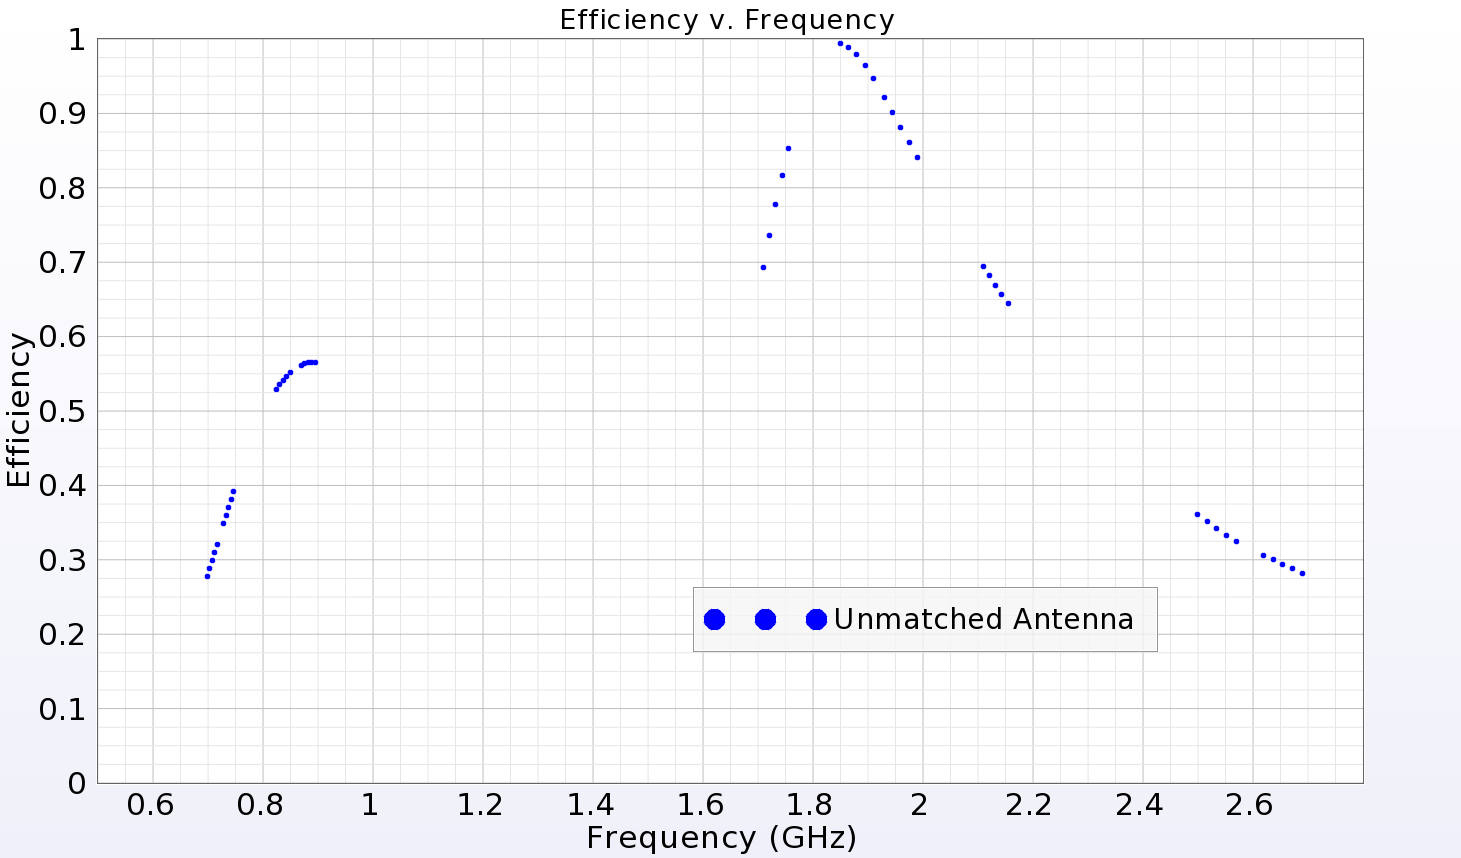 Figure 2: System efficiency of unmatched antenna.